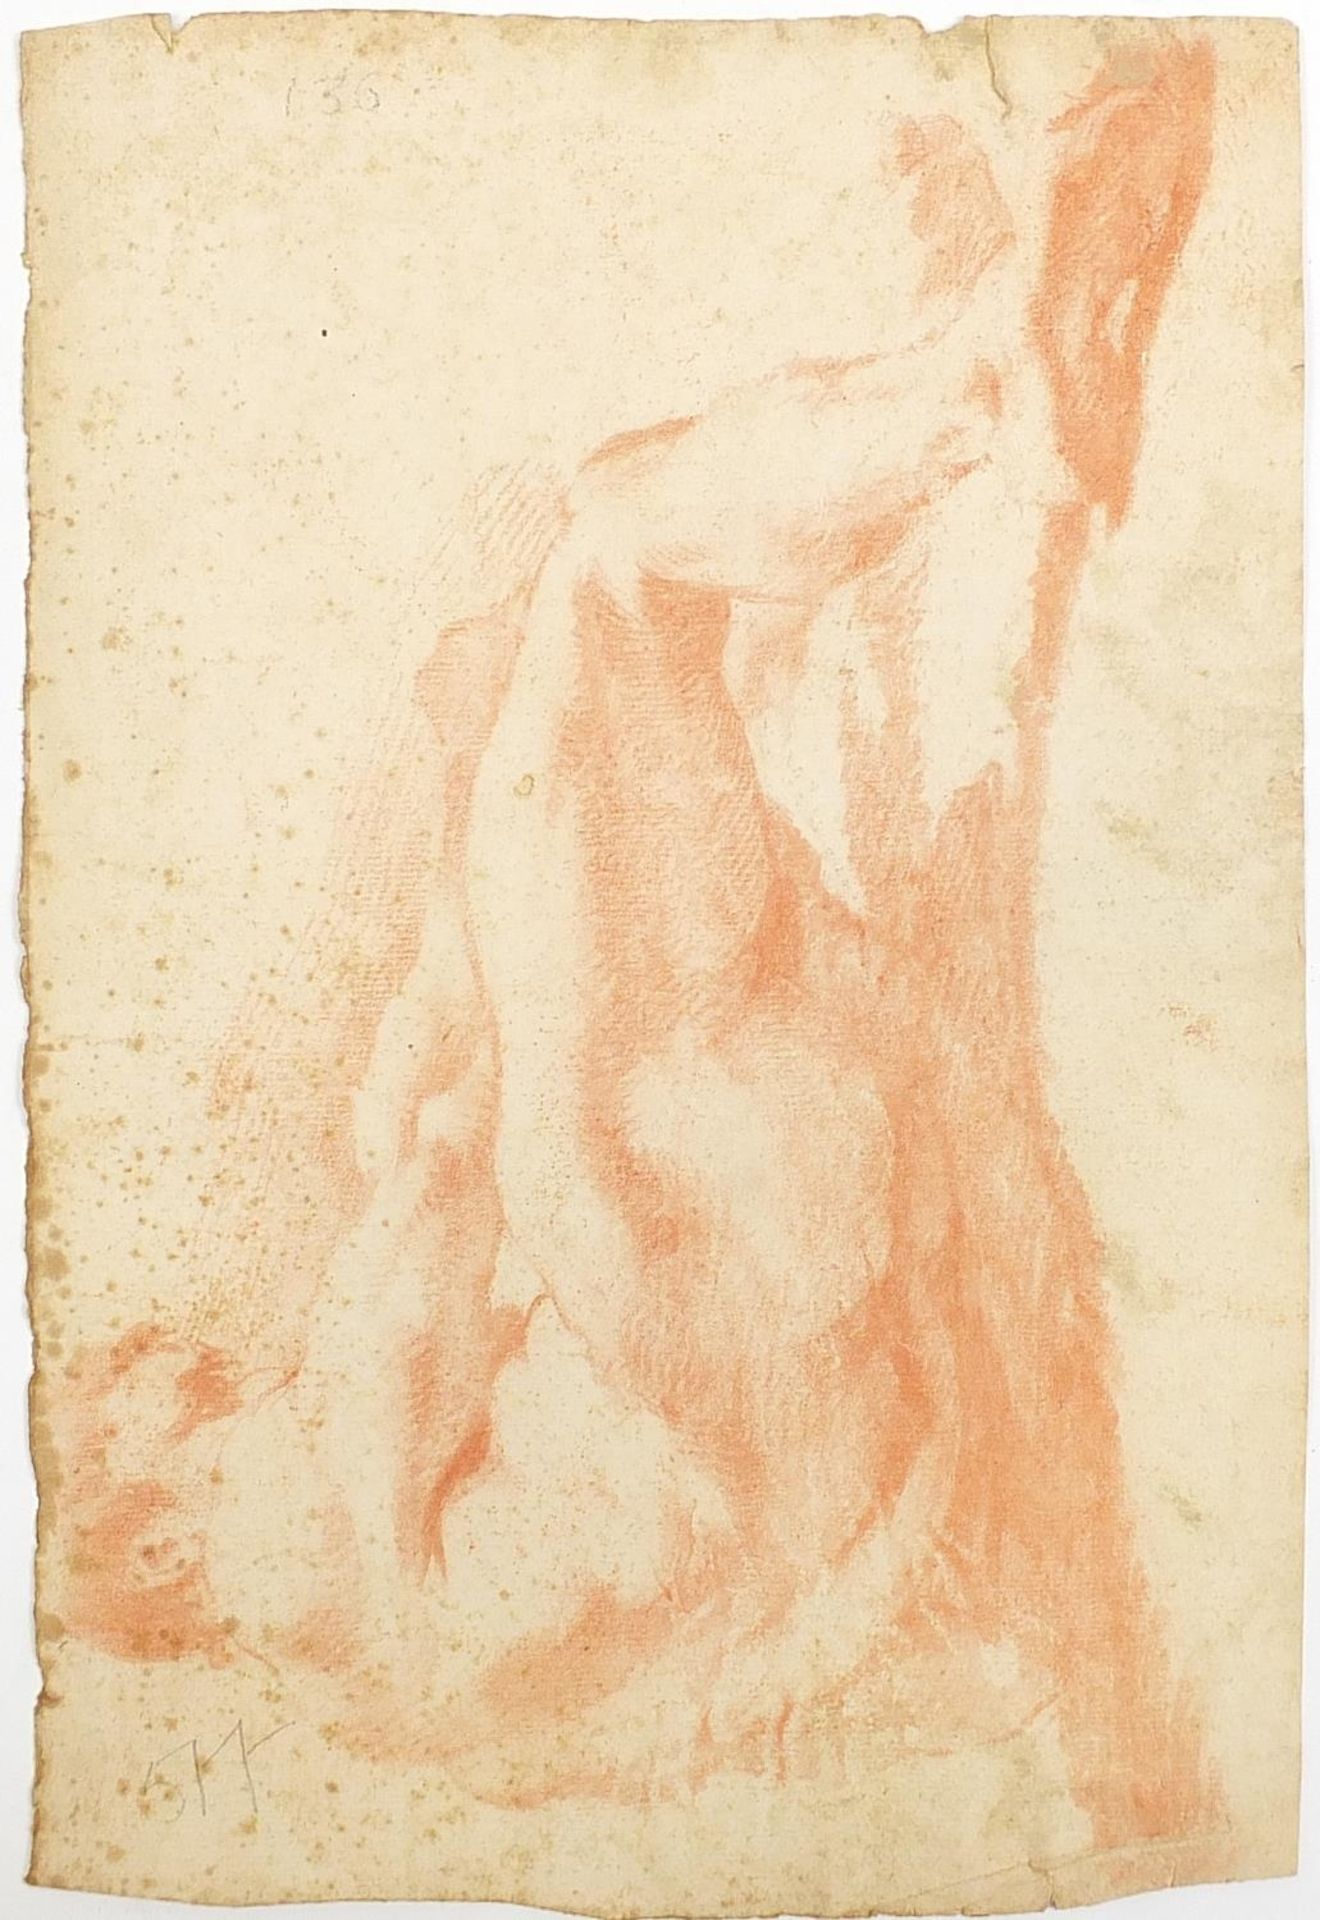 Seated nude man and study of a hand, two sanguine chalk drawings, unframed, the largest 43cm x 28cm - Image 7 of 7